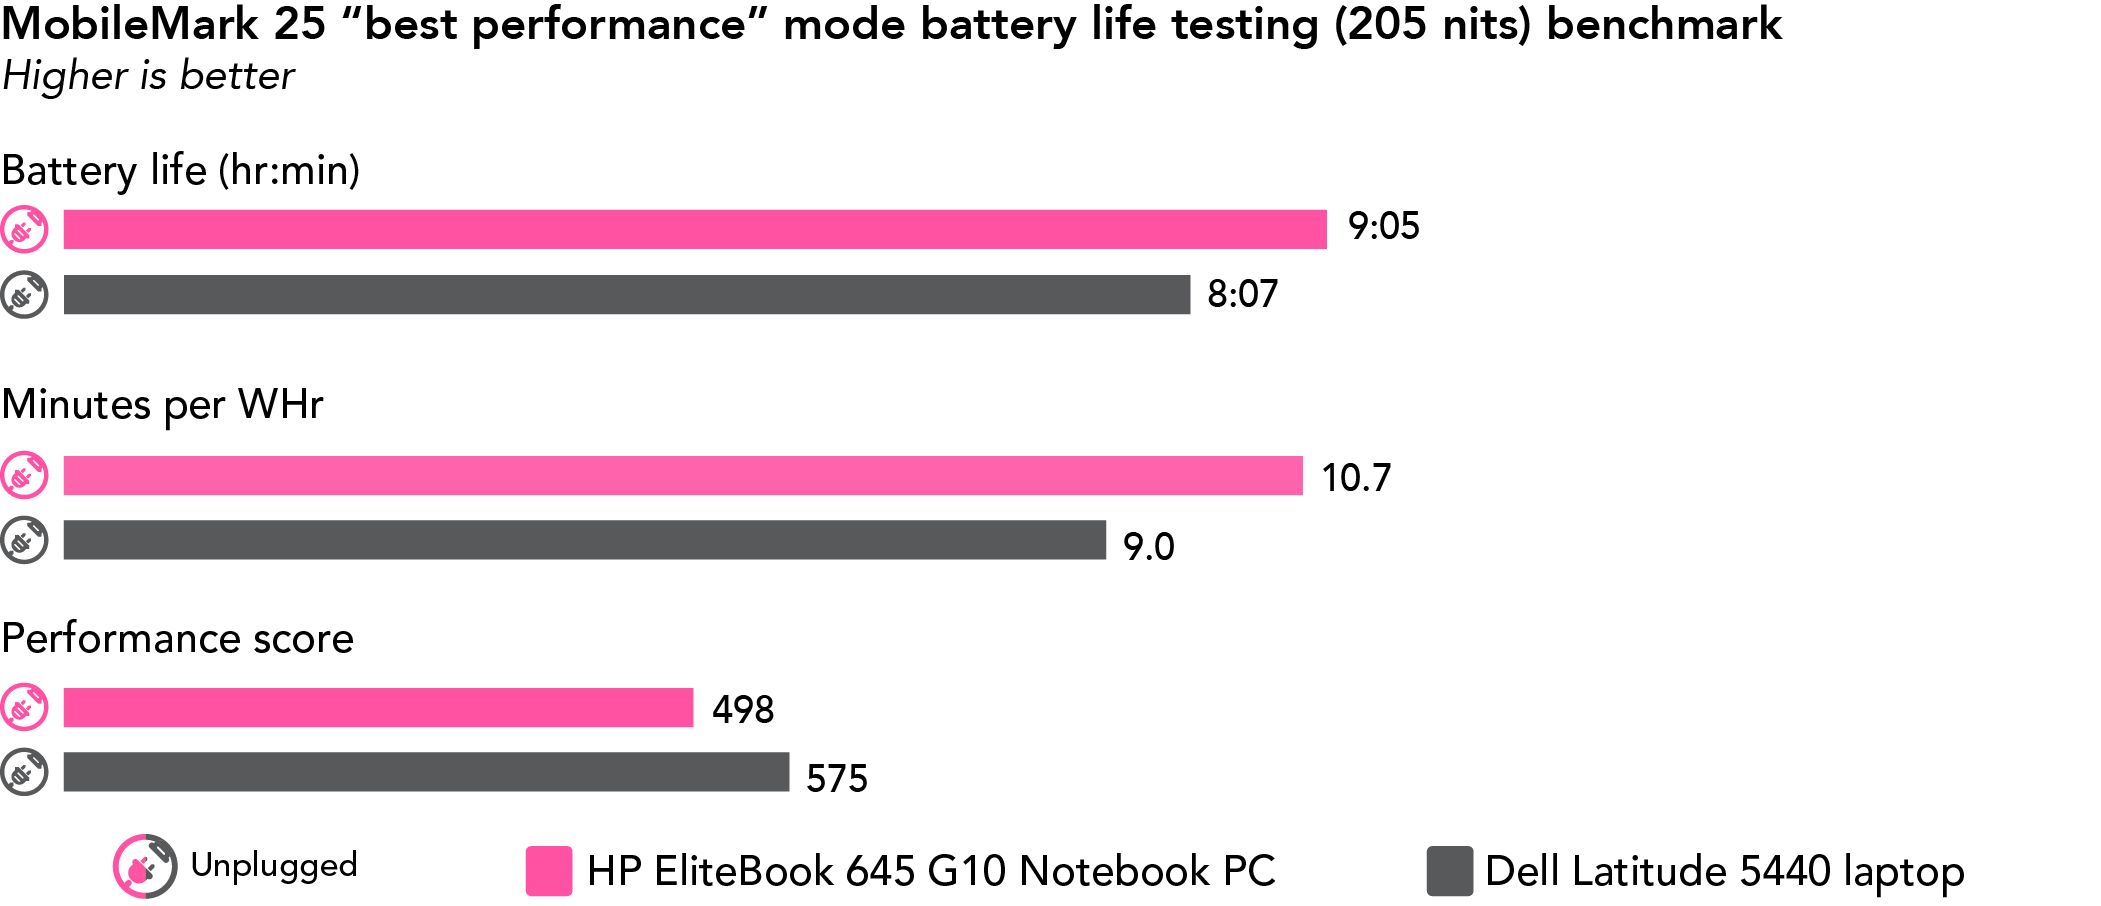 Chart of MobileMark 25 “best performance” mode battery life testing (205 nits) benchmark results. Higher is better. HP EliteBook 645 G10 Notebook PC has 9 hours and 5 minutes of battery life, 10.7 minutes per WHr, and a 498 performance score. Dell Latitude 5440 laptop has 8 hours and 7 minutes of battery life, 9.0 minutes per WHr, and a 575 performance score.